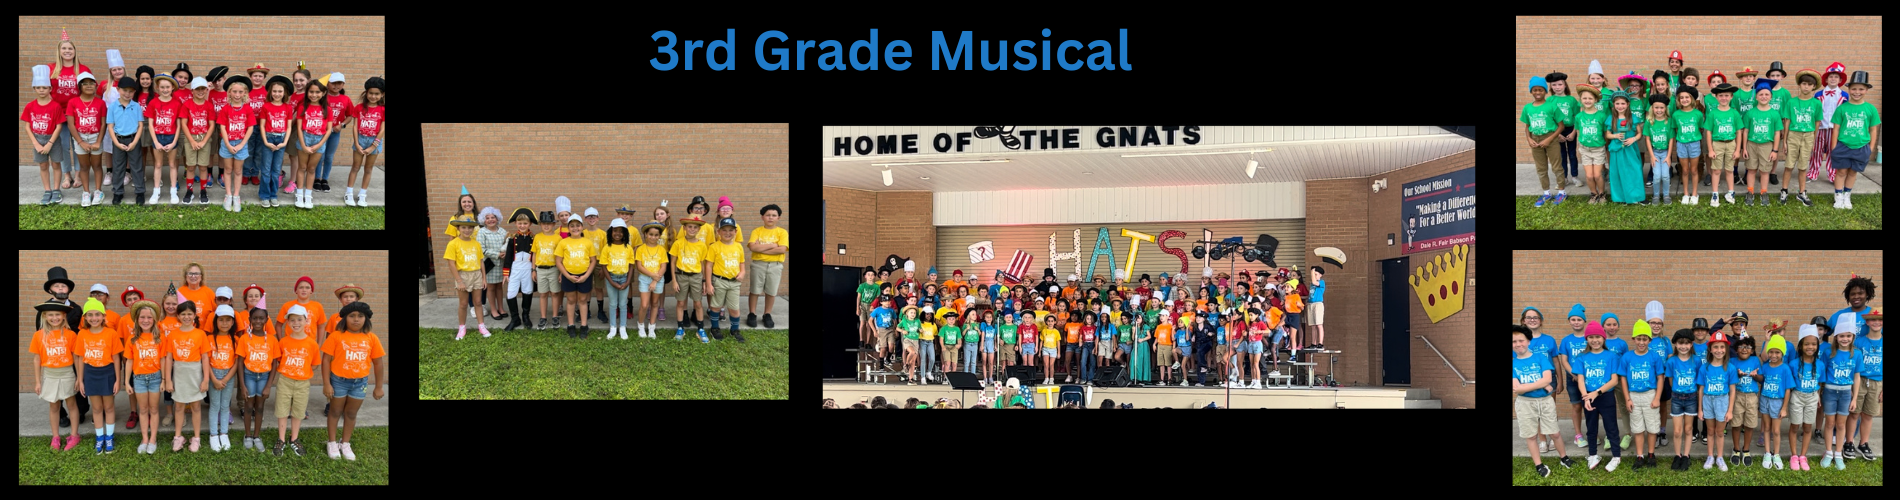 3rd Grade Students in their Musical Hats